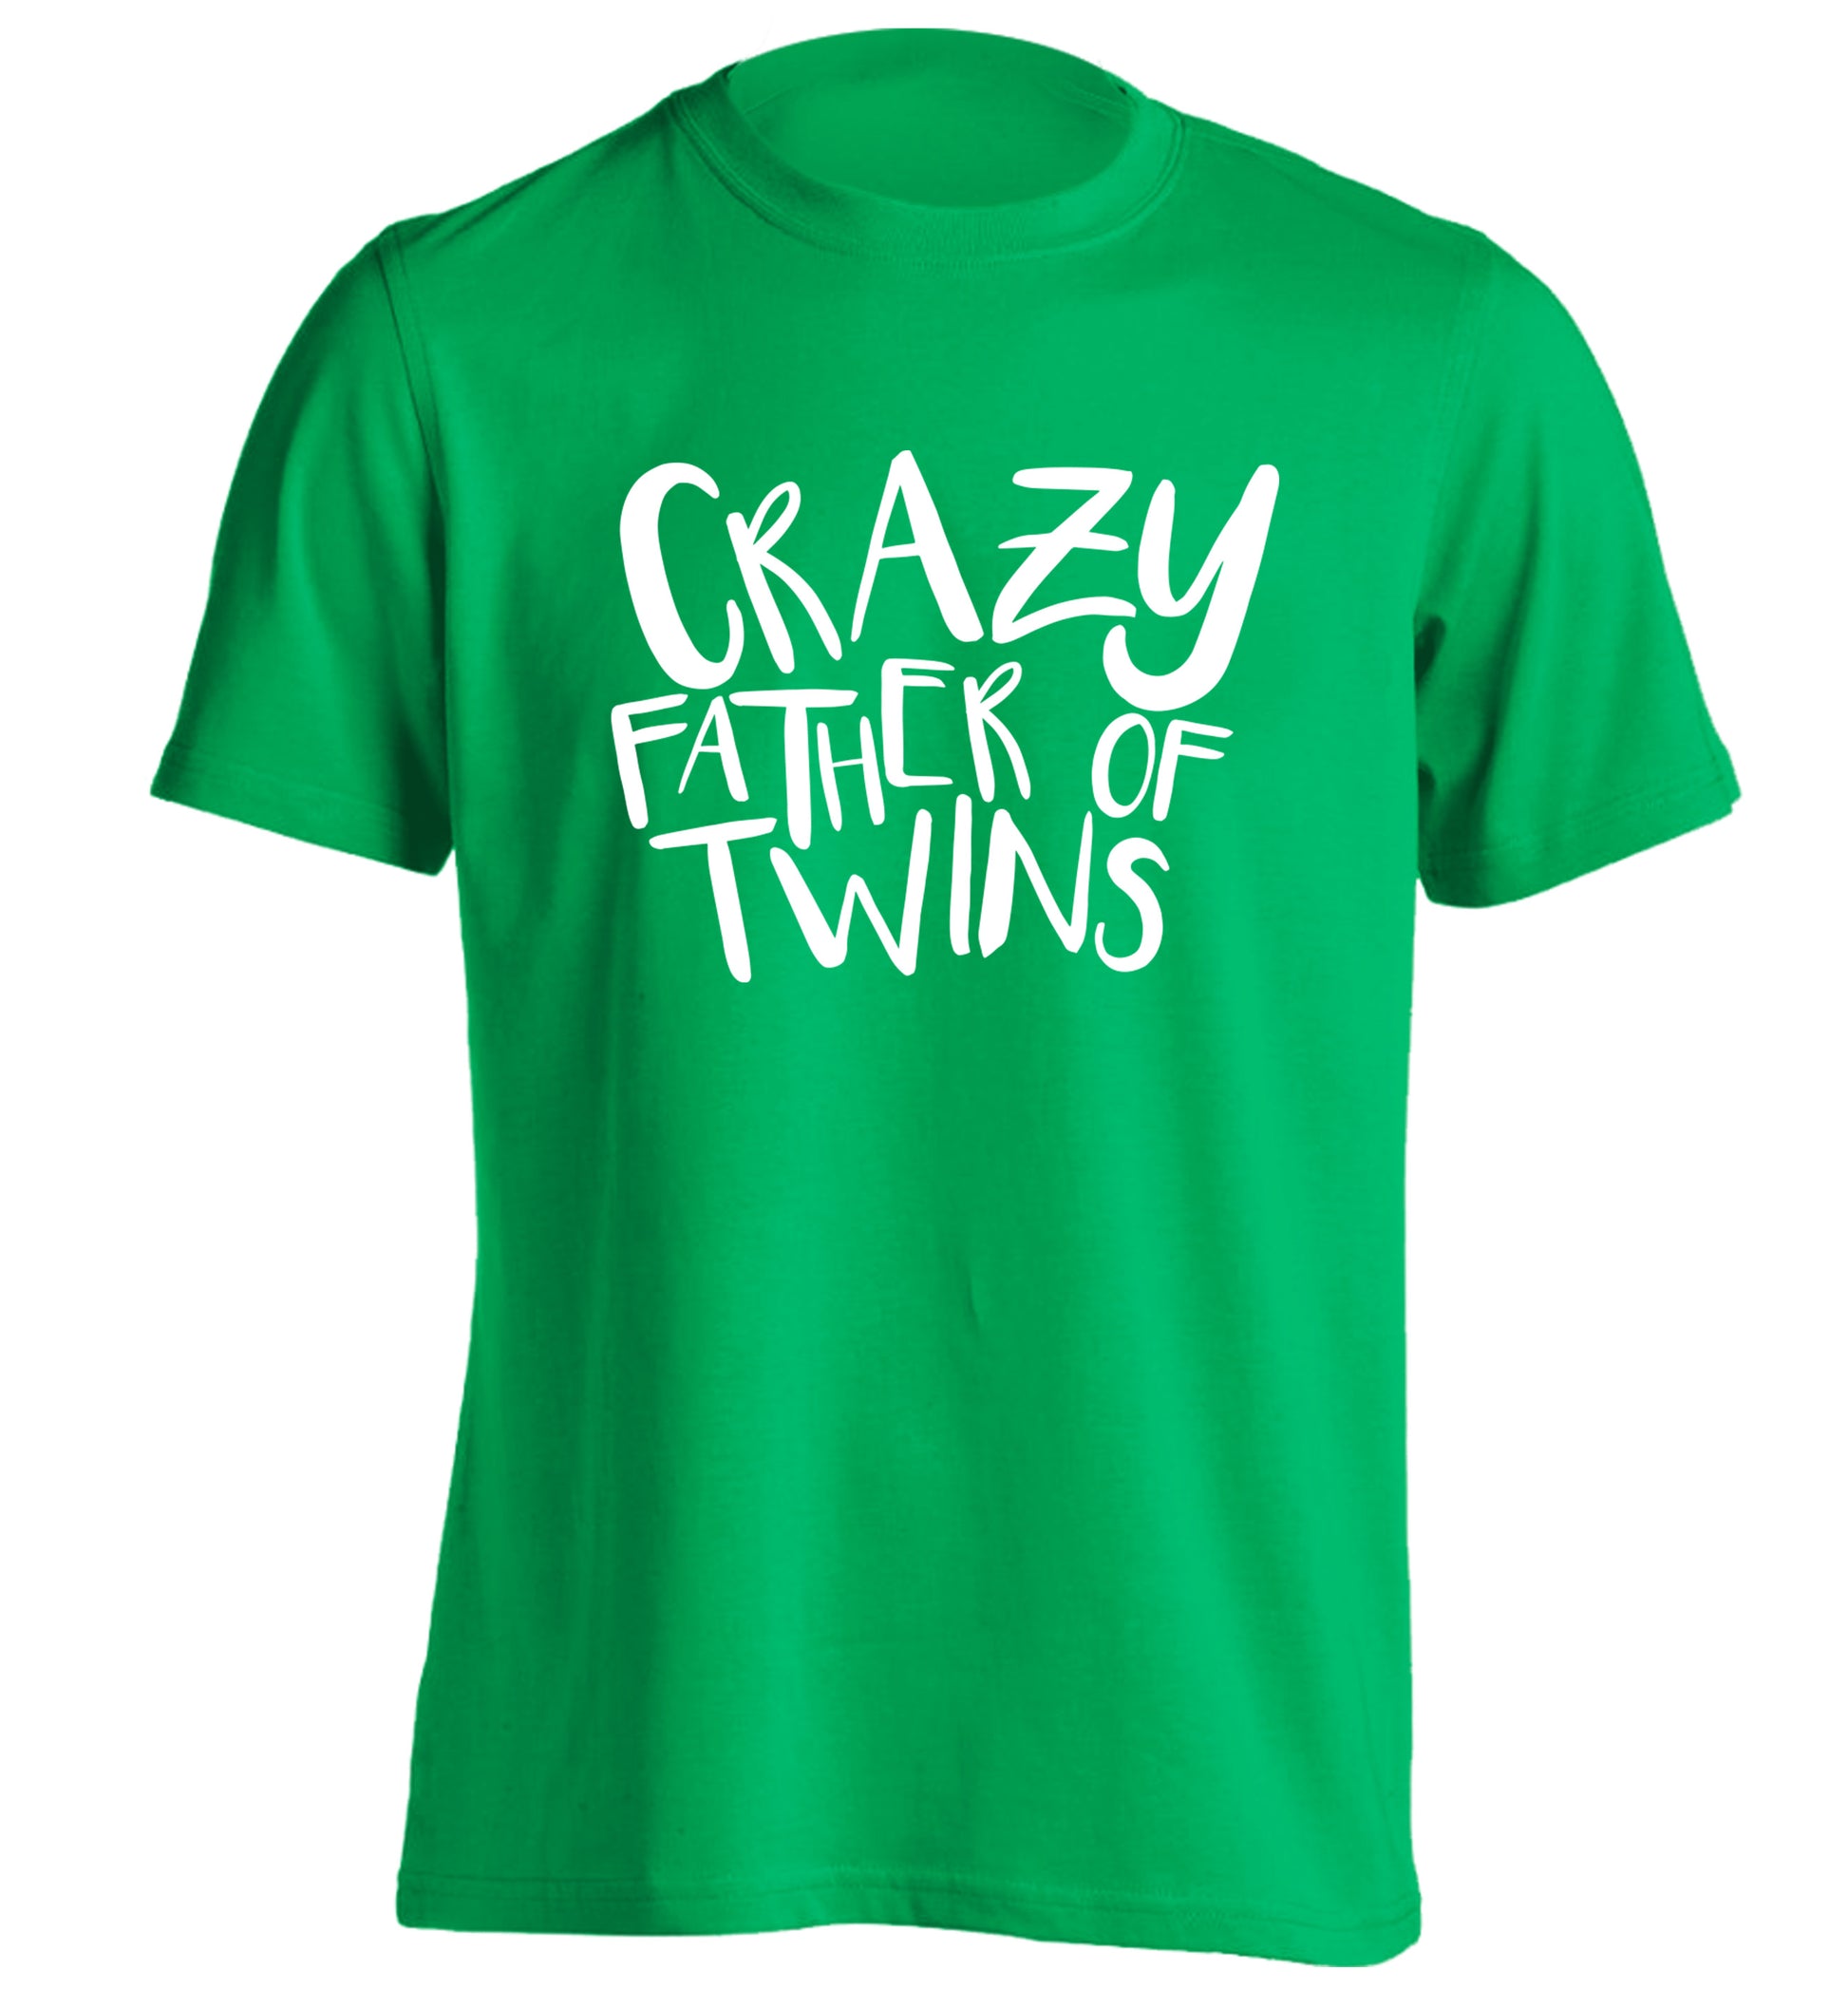 Crazy father of twins adults unisex green Tshirt 2XL